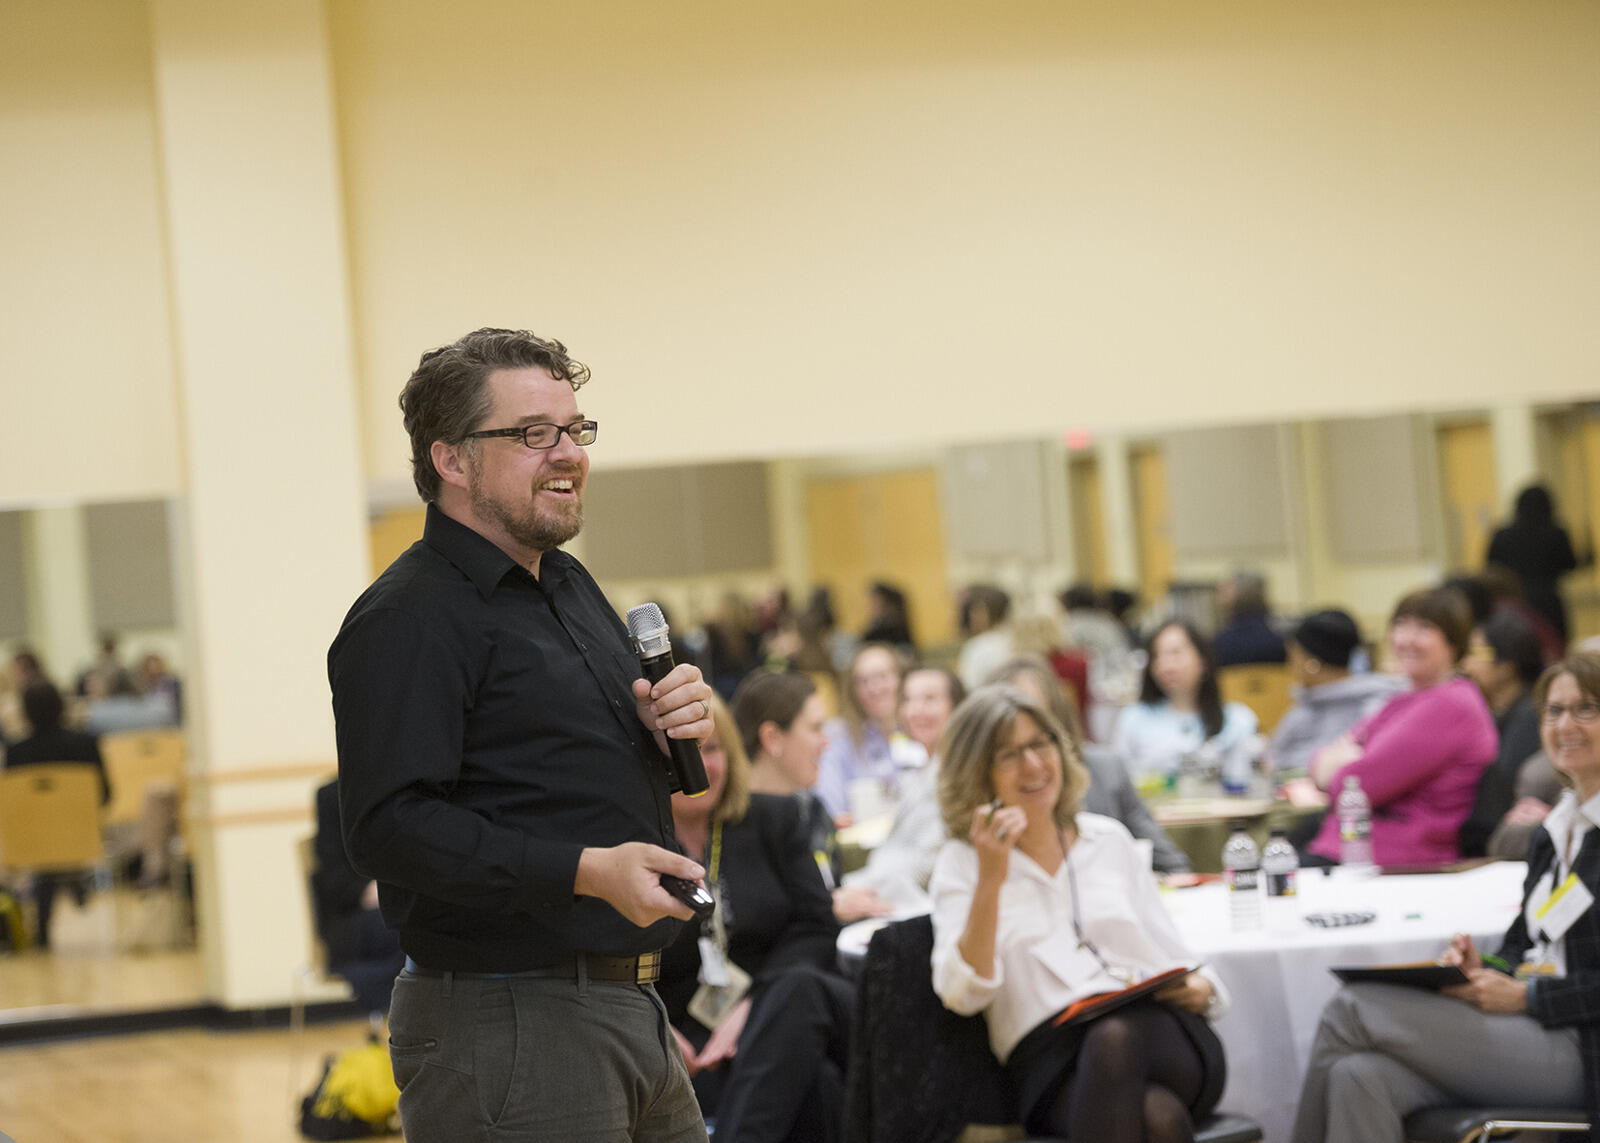 Keynote speaker Matthew Freeman discussed strategies for improving diversity and inclusion in the workplace during the 24th annual WISDM leadership conference. Photo by Thomas Kojcsich, University Marketing.